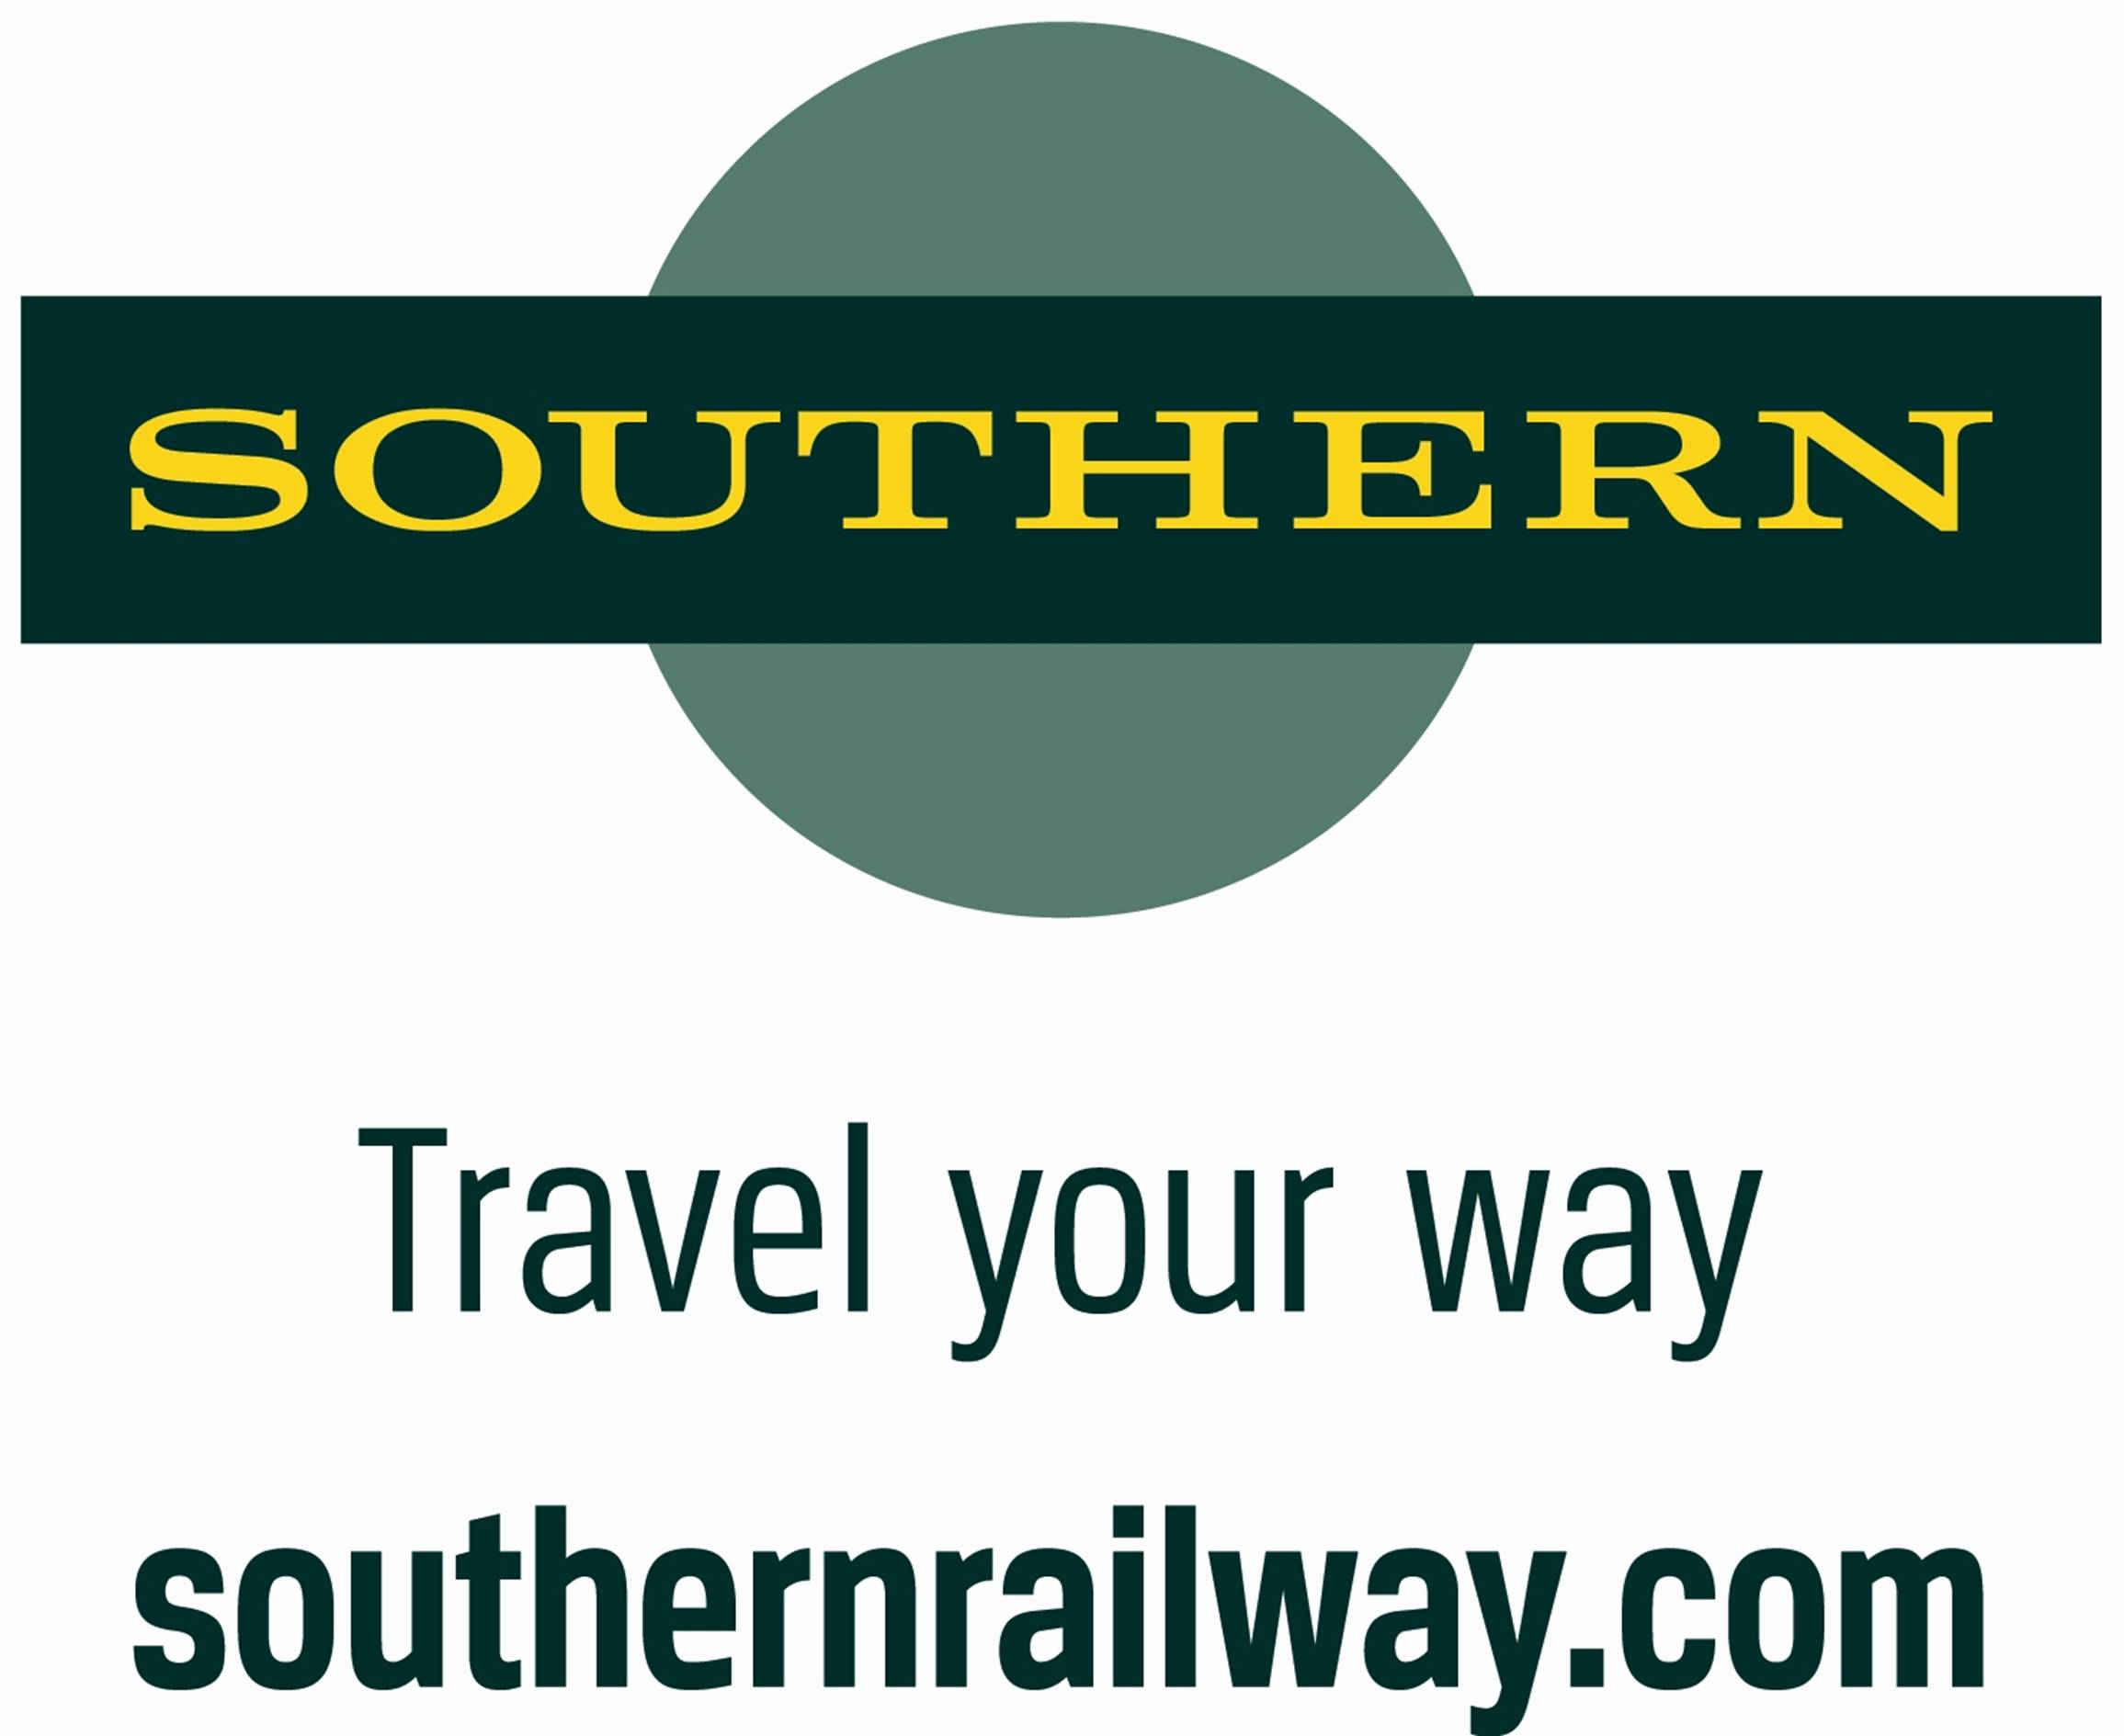 Southern Logo - Having trouble with Southern Rail website?. Student Advice Service